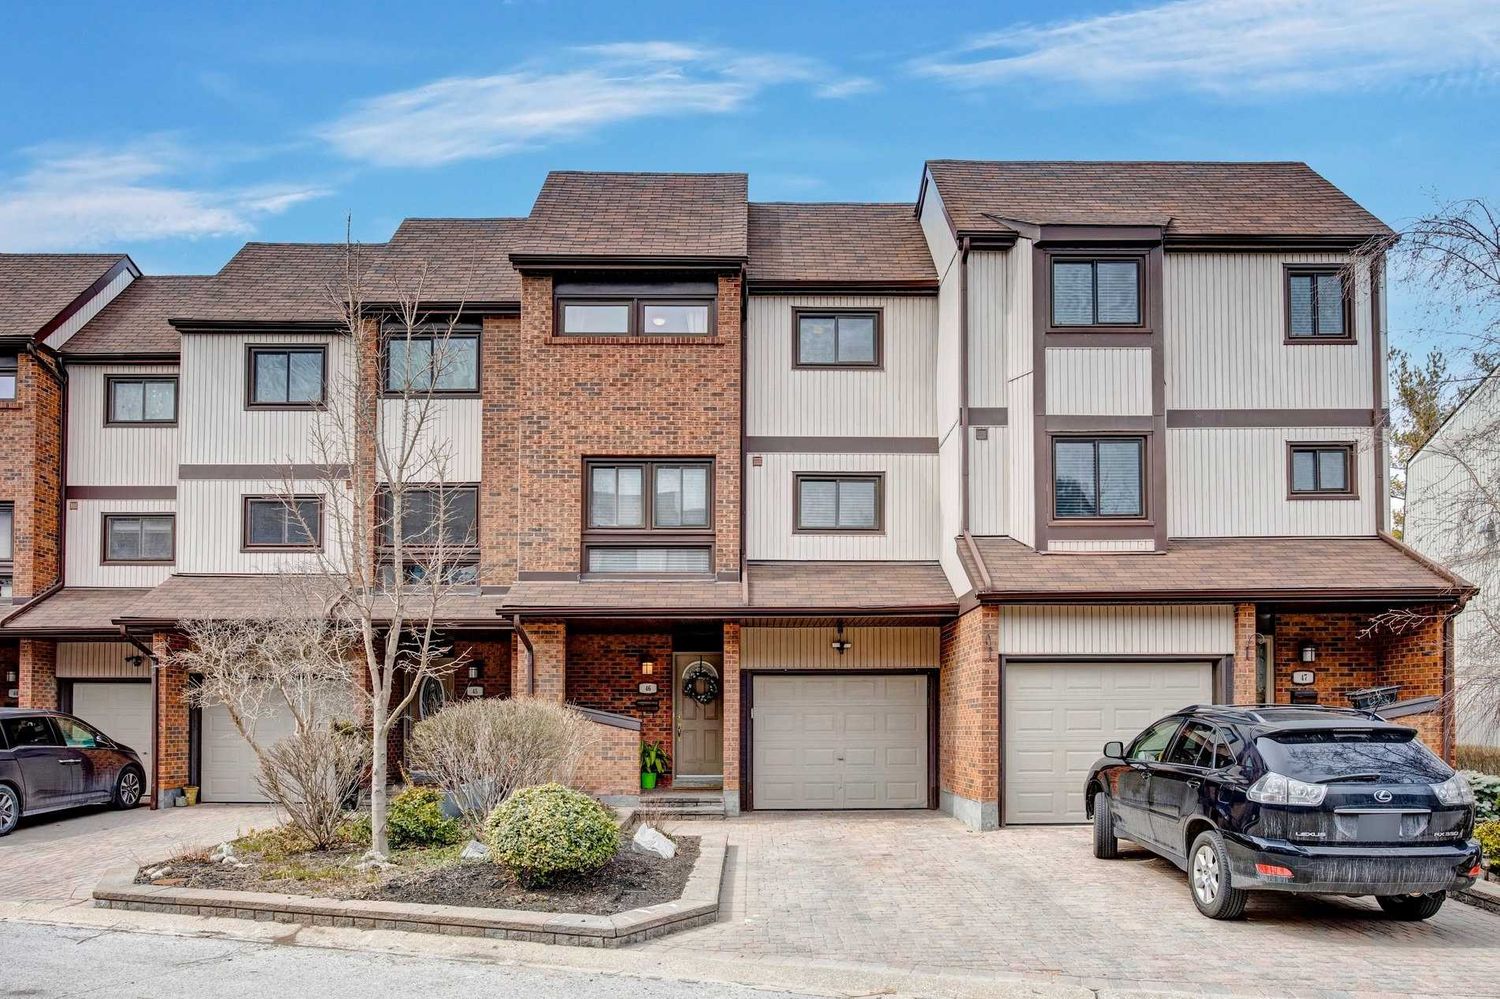 1010-1200 Walden Circ. Walden Circle Townhomes is located in  Mississauga, Toronto - image #1 of 2